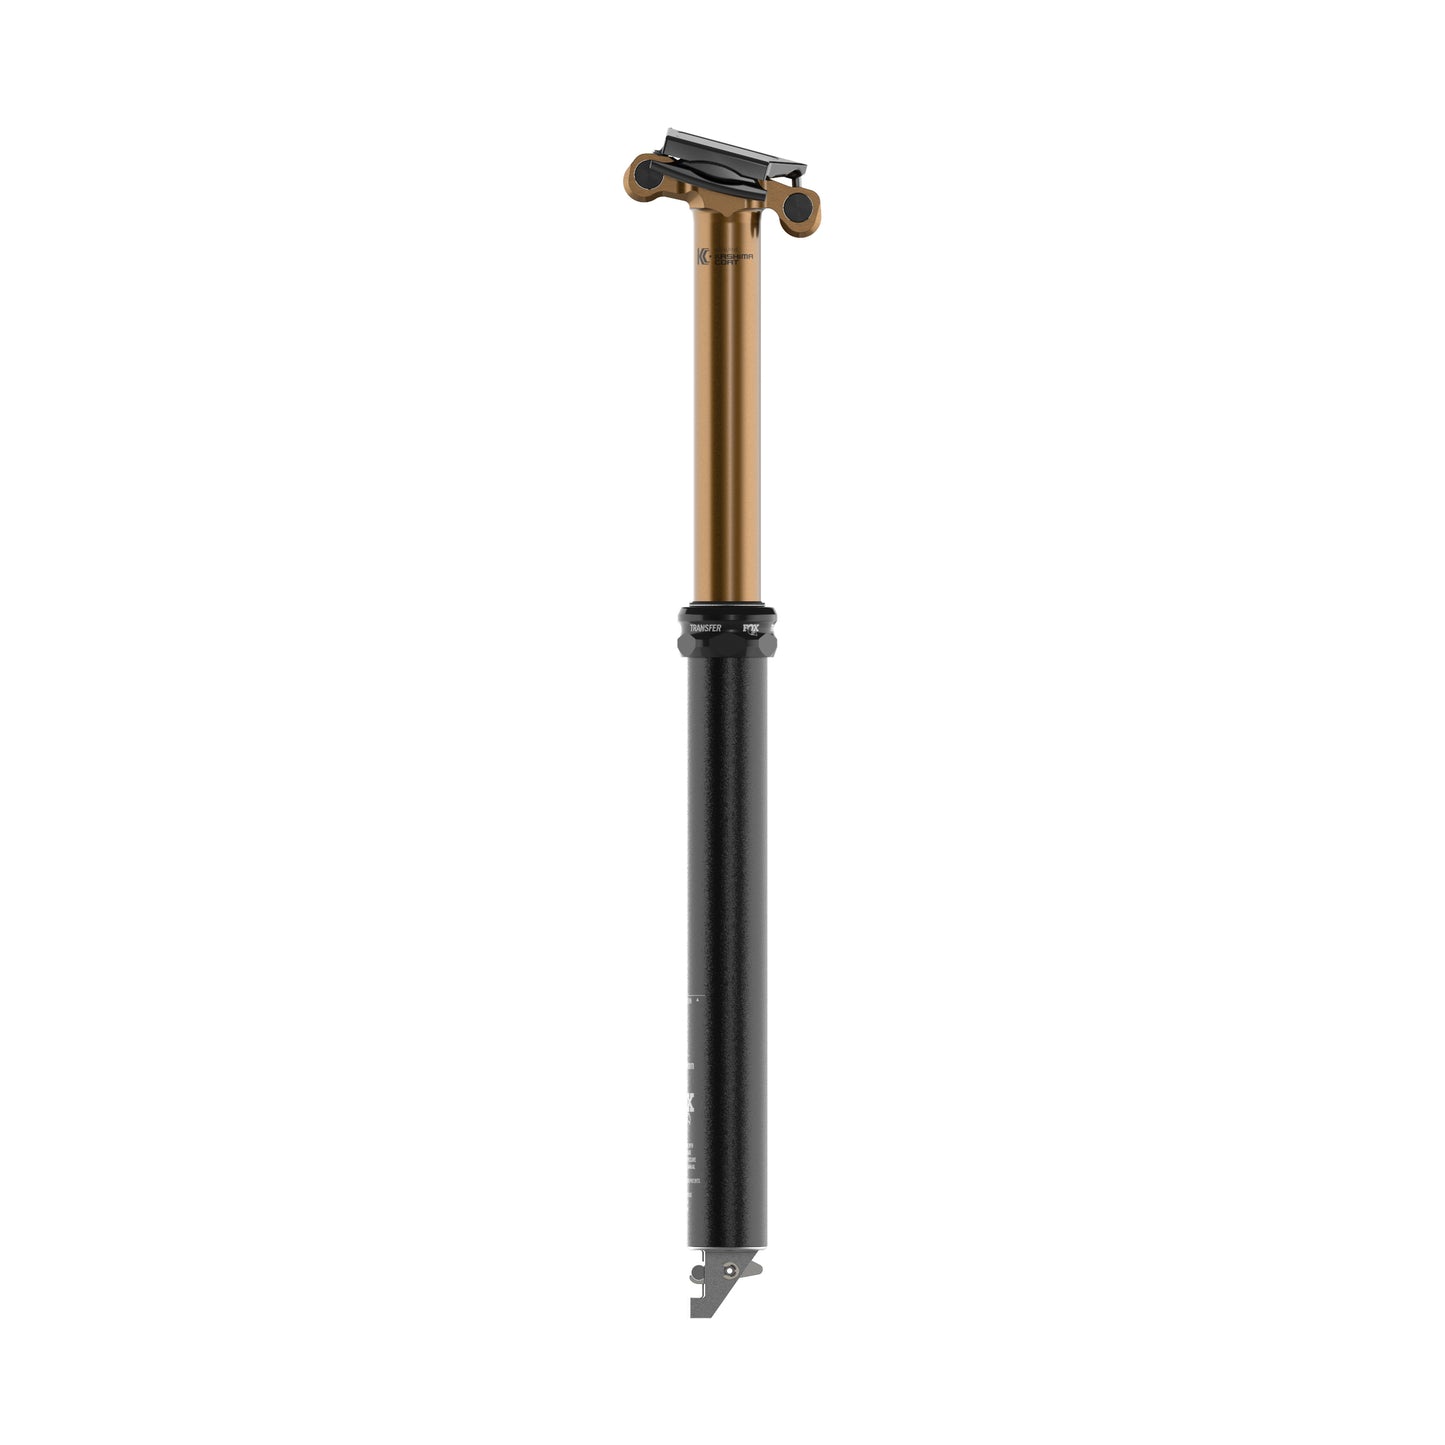 FOX TRANSFER FACTORY DROPPER SEAT POST 2022_21 - 30.9, 150MM TRAVEL, INTERNAL (SAVE 35% NOW! ENTER CODE FOX35 AT CHECKOUT.)